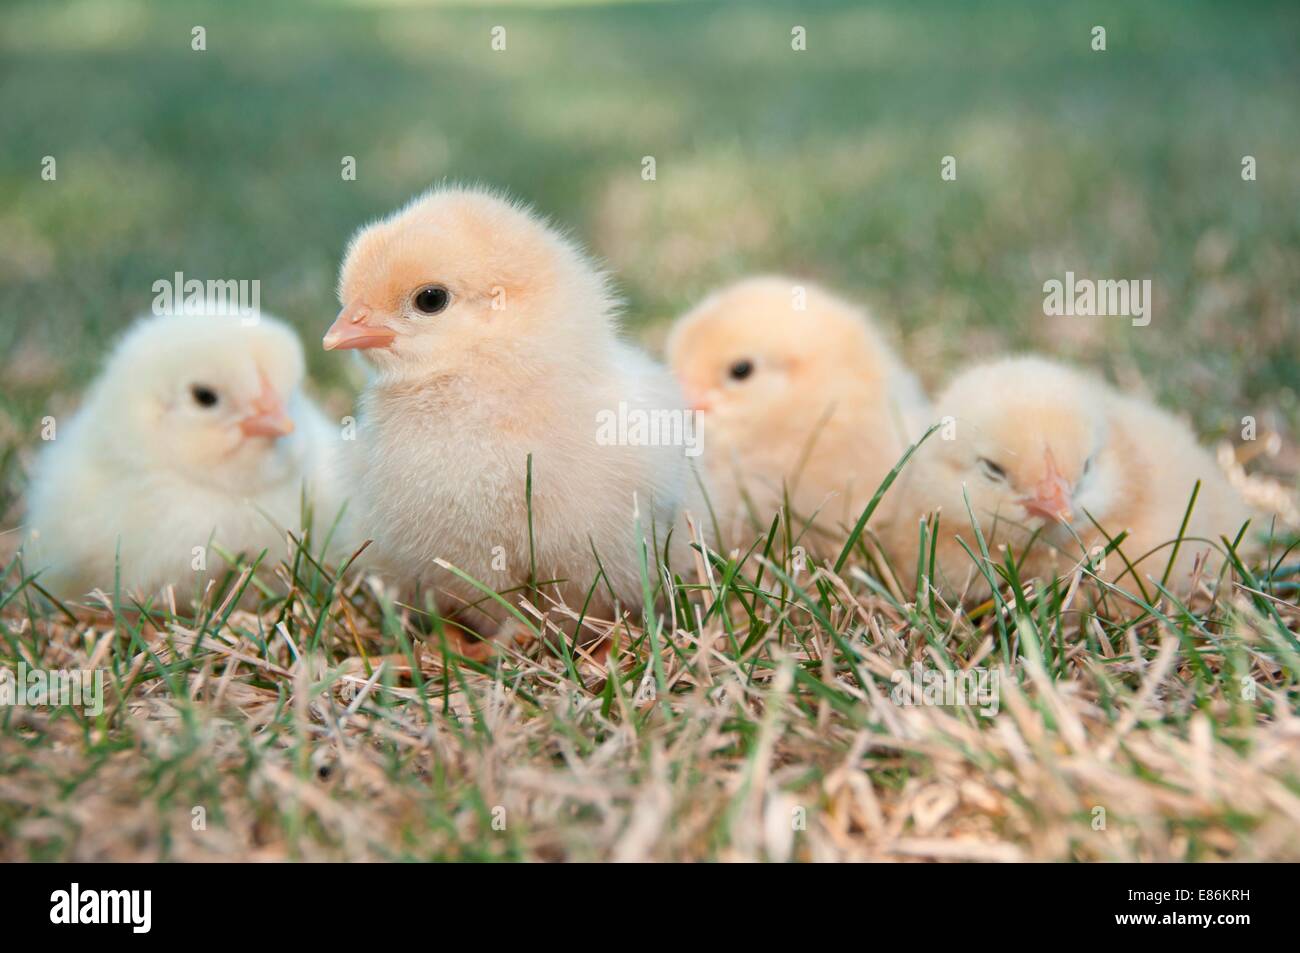 Four chicks sitting on some gass Stock Photo